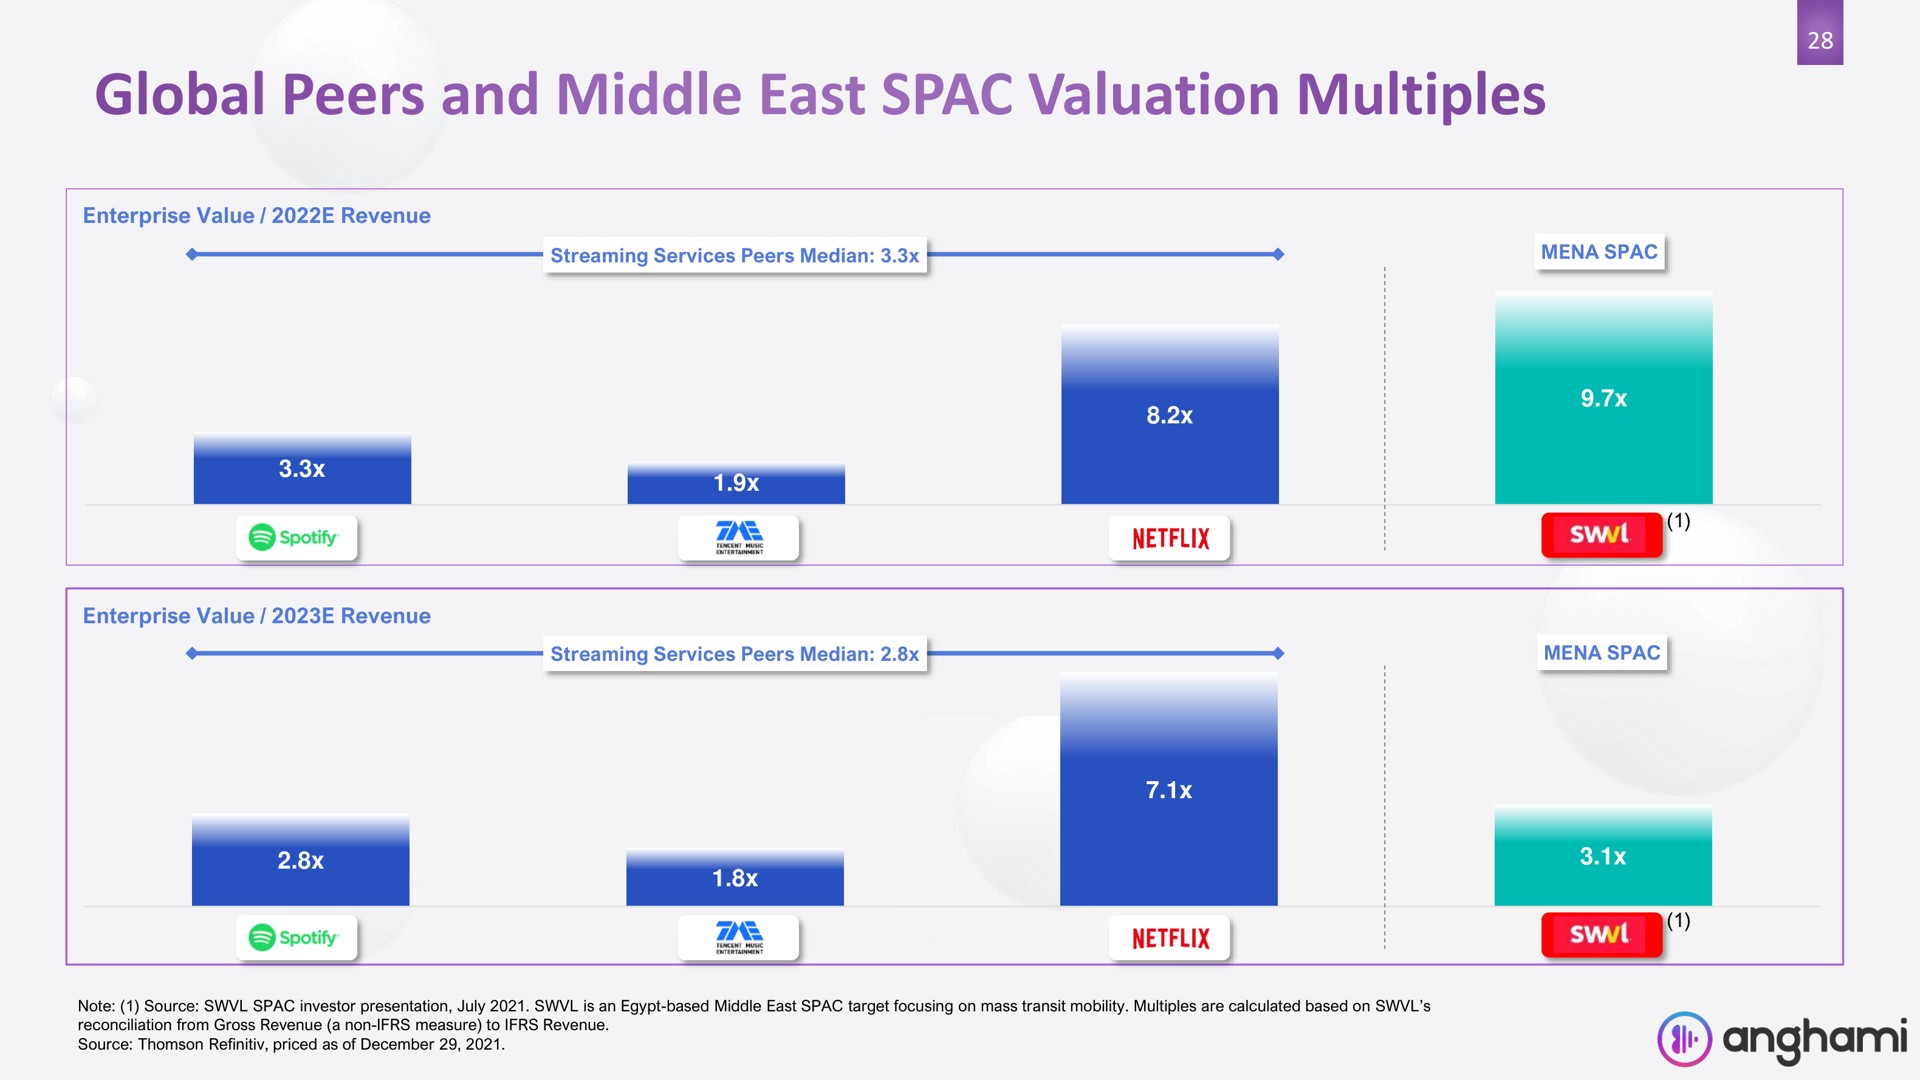 global peers and middle east valuation multiples ley | Anghami